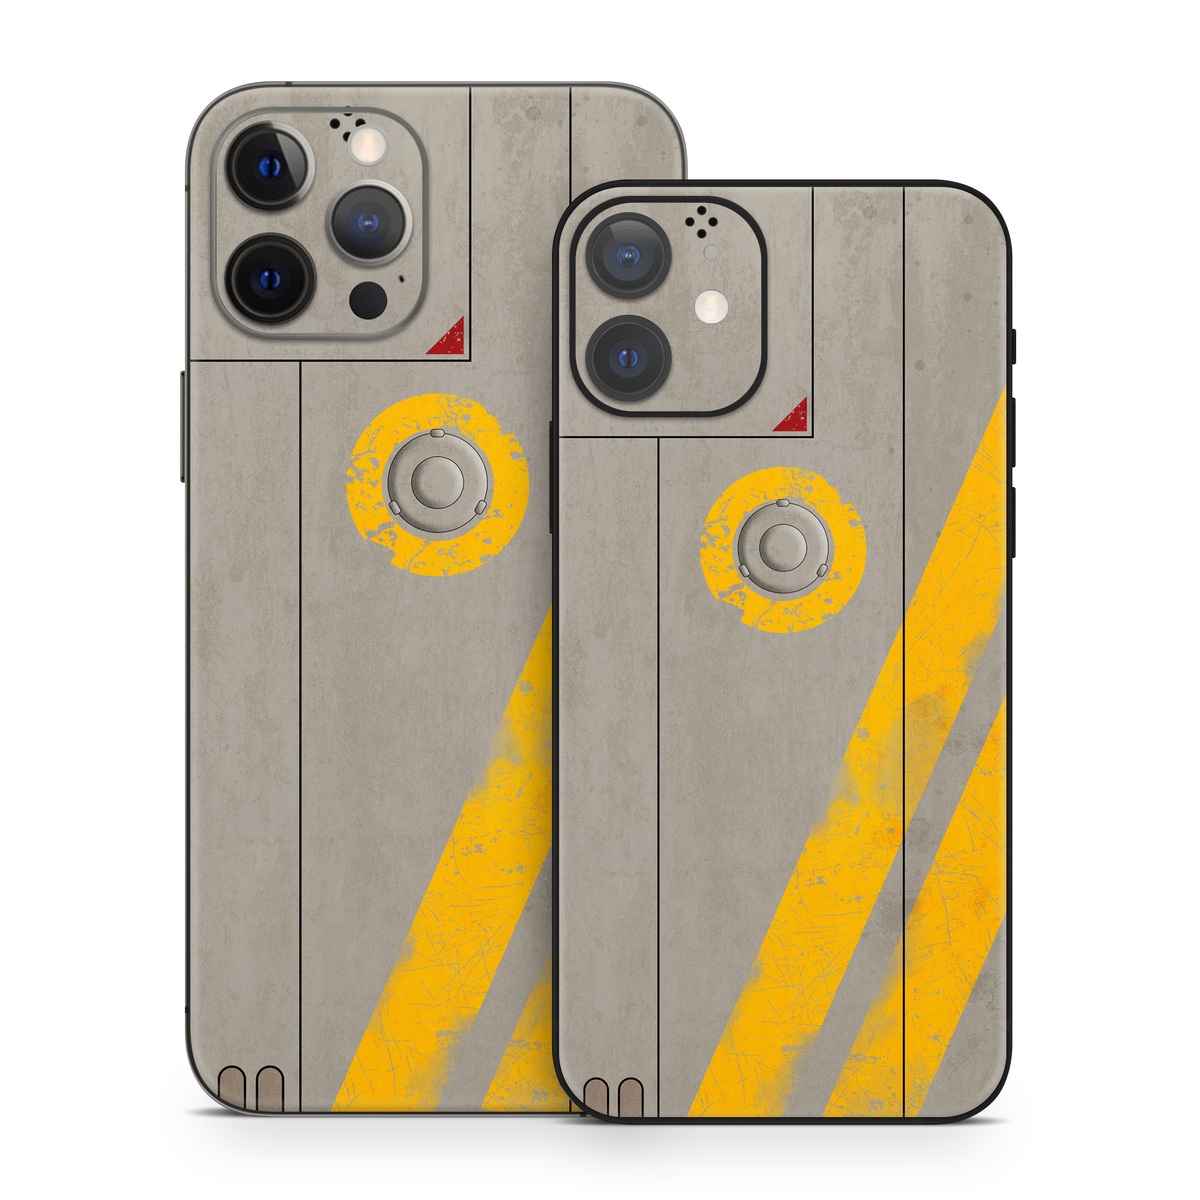 iPhone 12 Series Skin design of Yellow, Wall, Line, Orange, Design, Concrete, Font, Architecture, Parallel, Wood, with gray, yellow, red, black colors